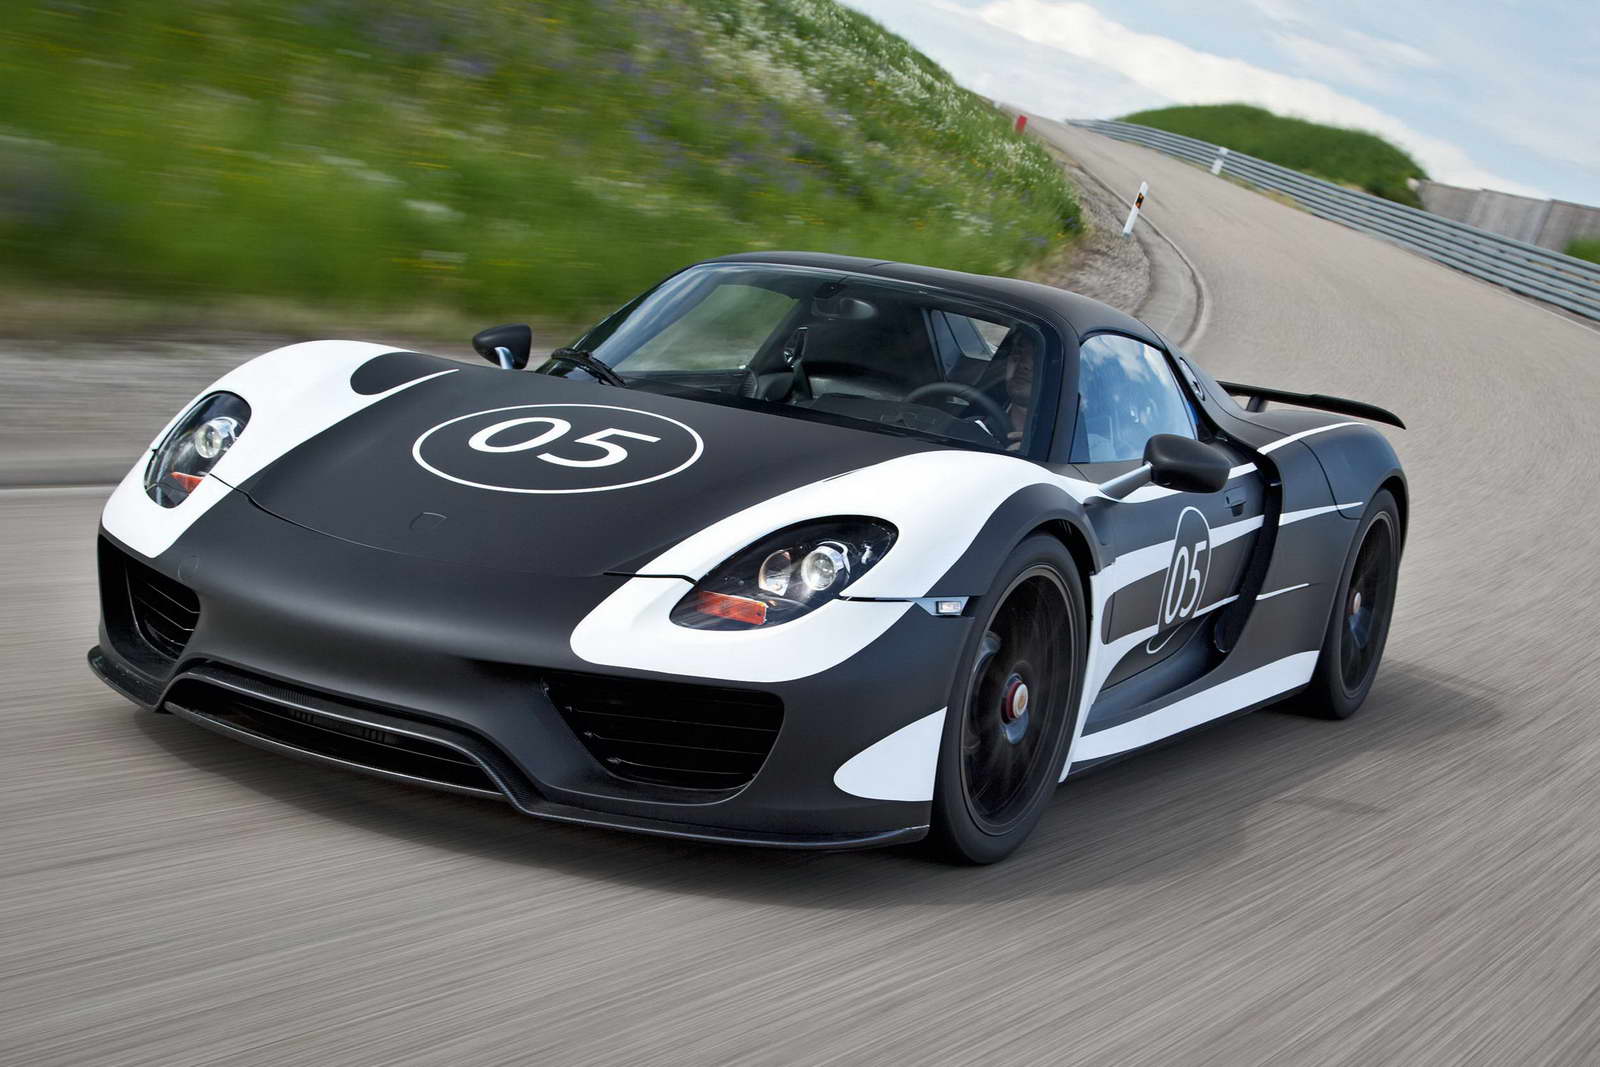 Porsche 918 Spyder is Sold Out, US Grabs 1/3 of its